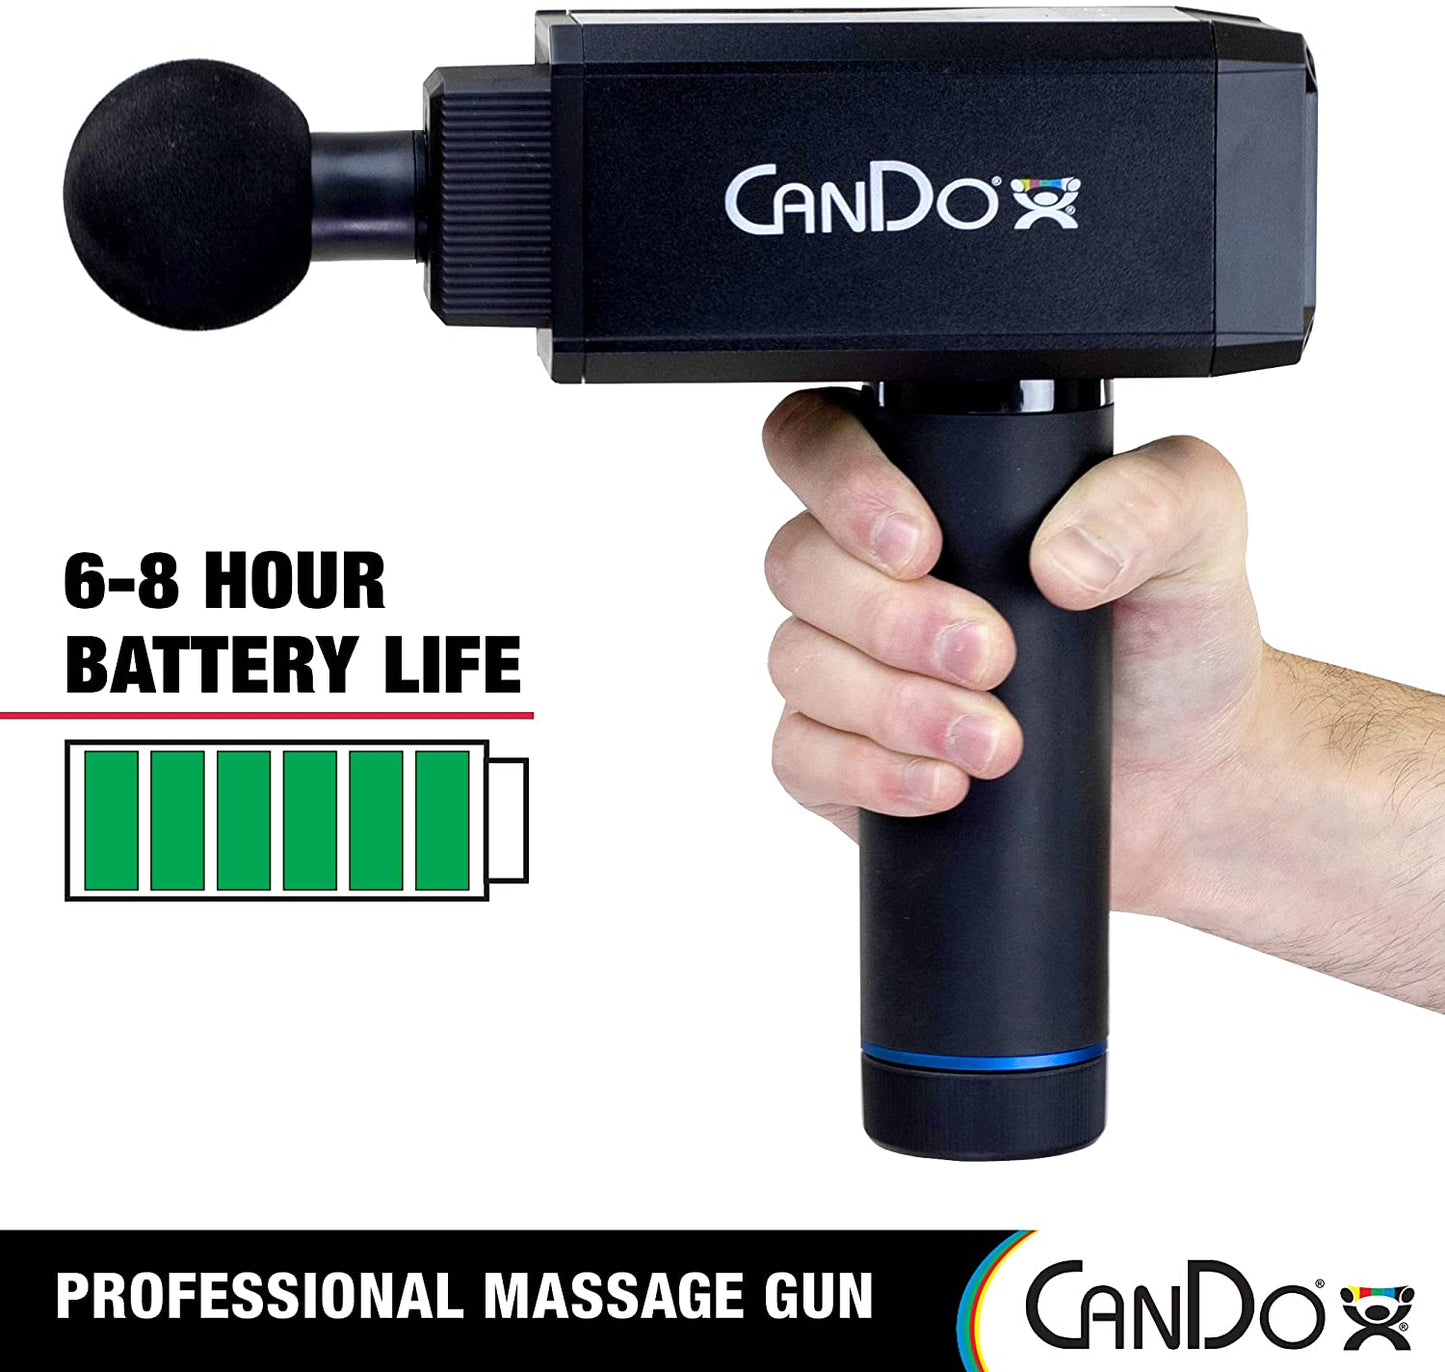 Cando Multi-Speed Vibration Percussion High-Powered Massage Gun with Interchangeable Heads